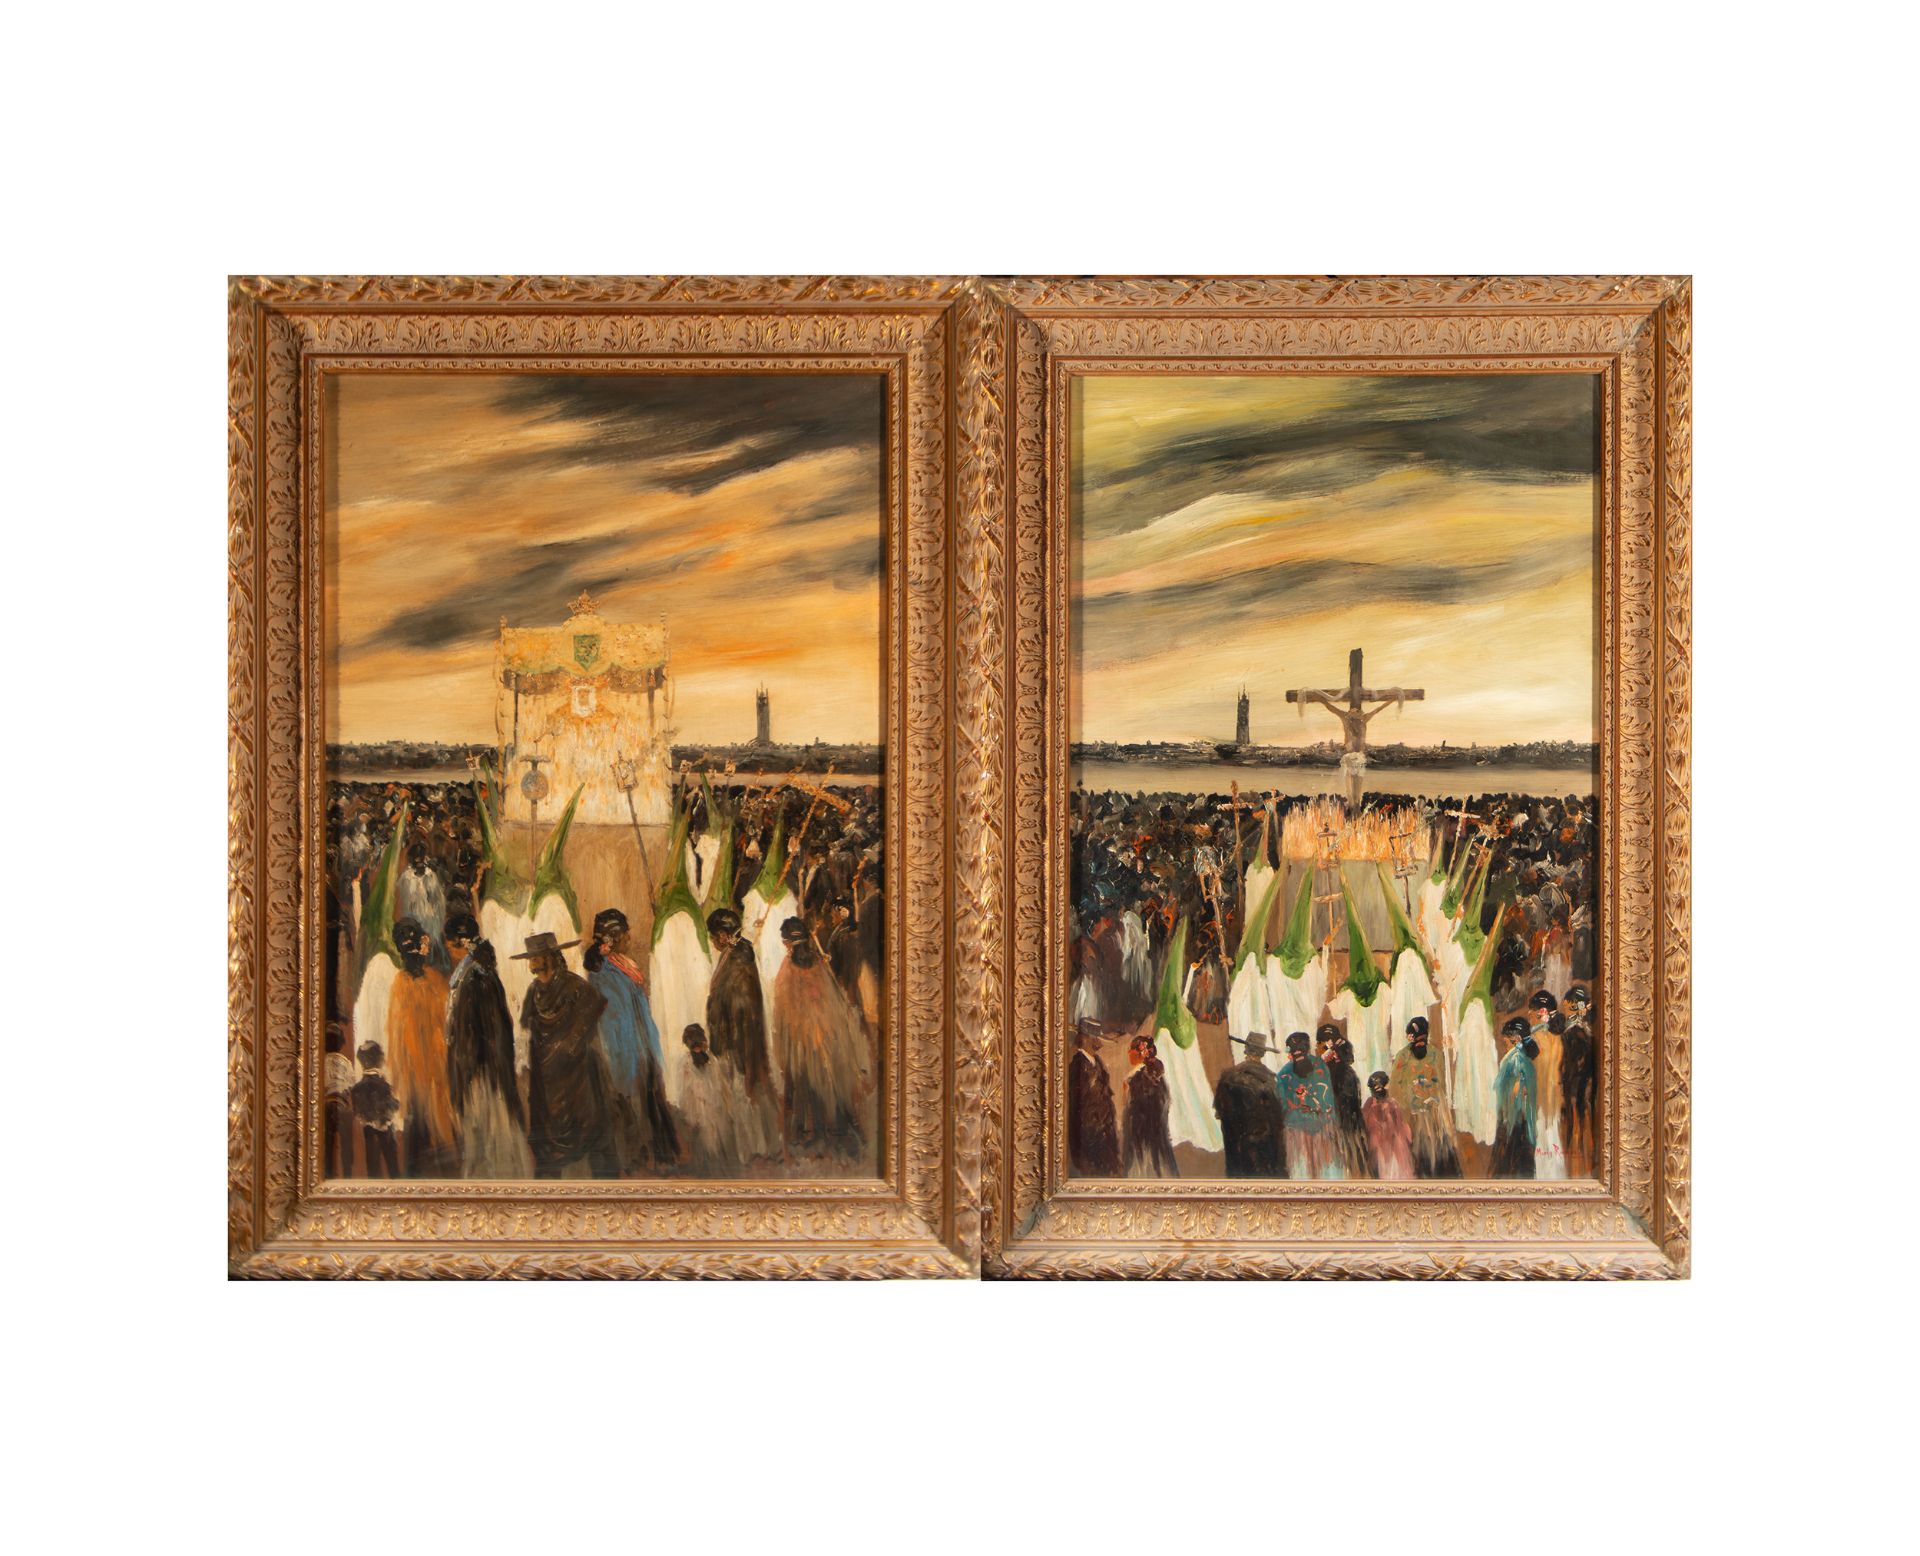 Pair of Holy Week processions, 20th century Spanish school, signed María Ramos